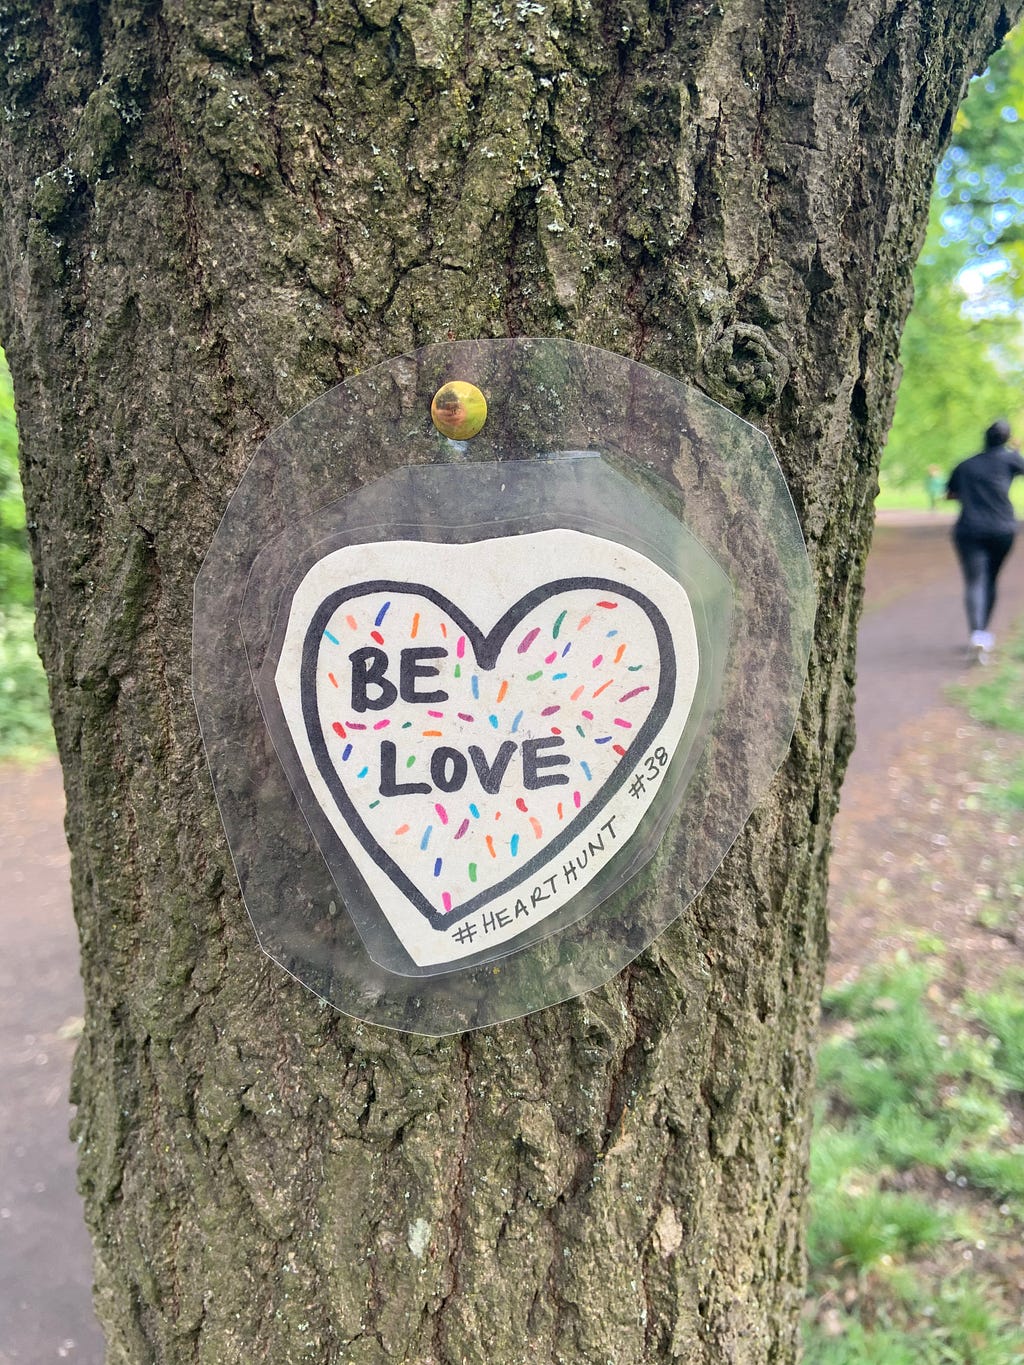 A paper heart with “Be Love” written on it, pinned to a tree.